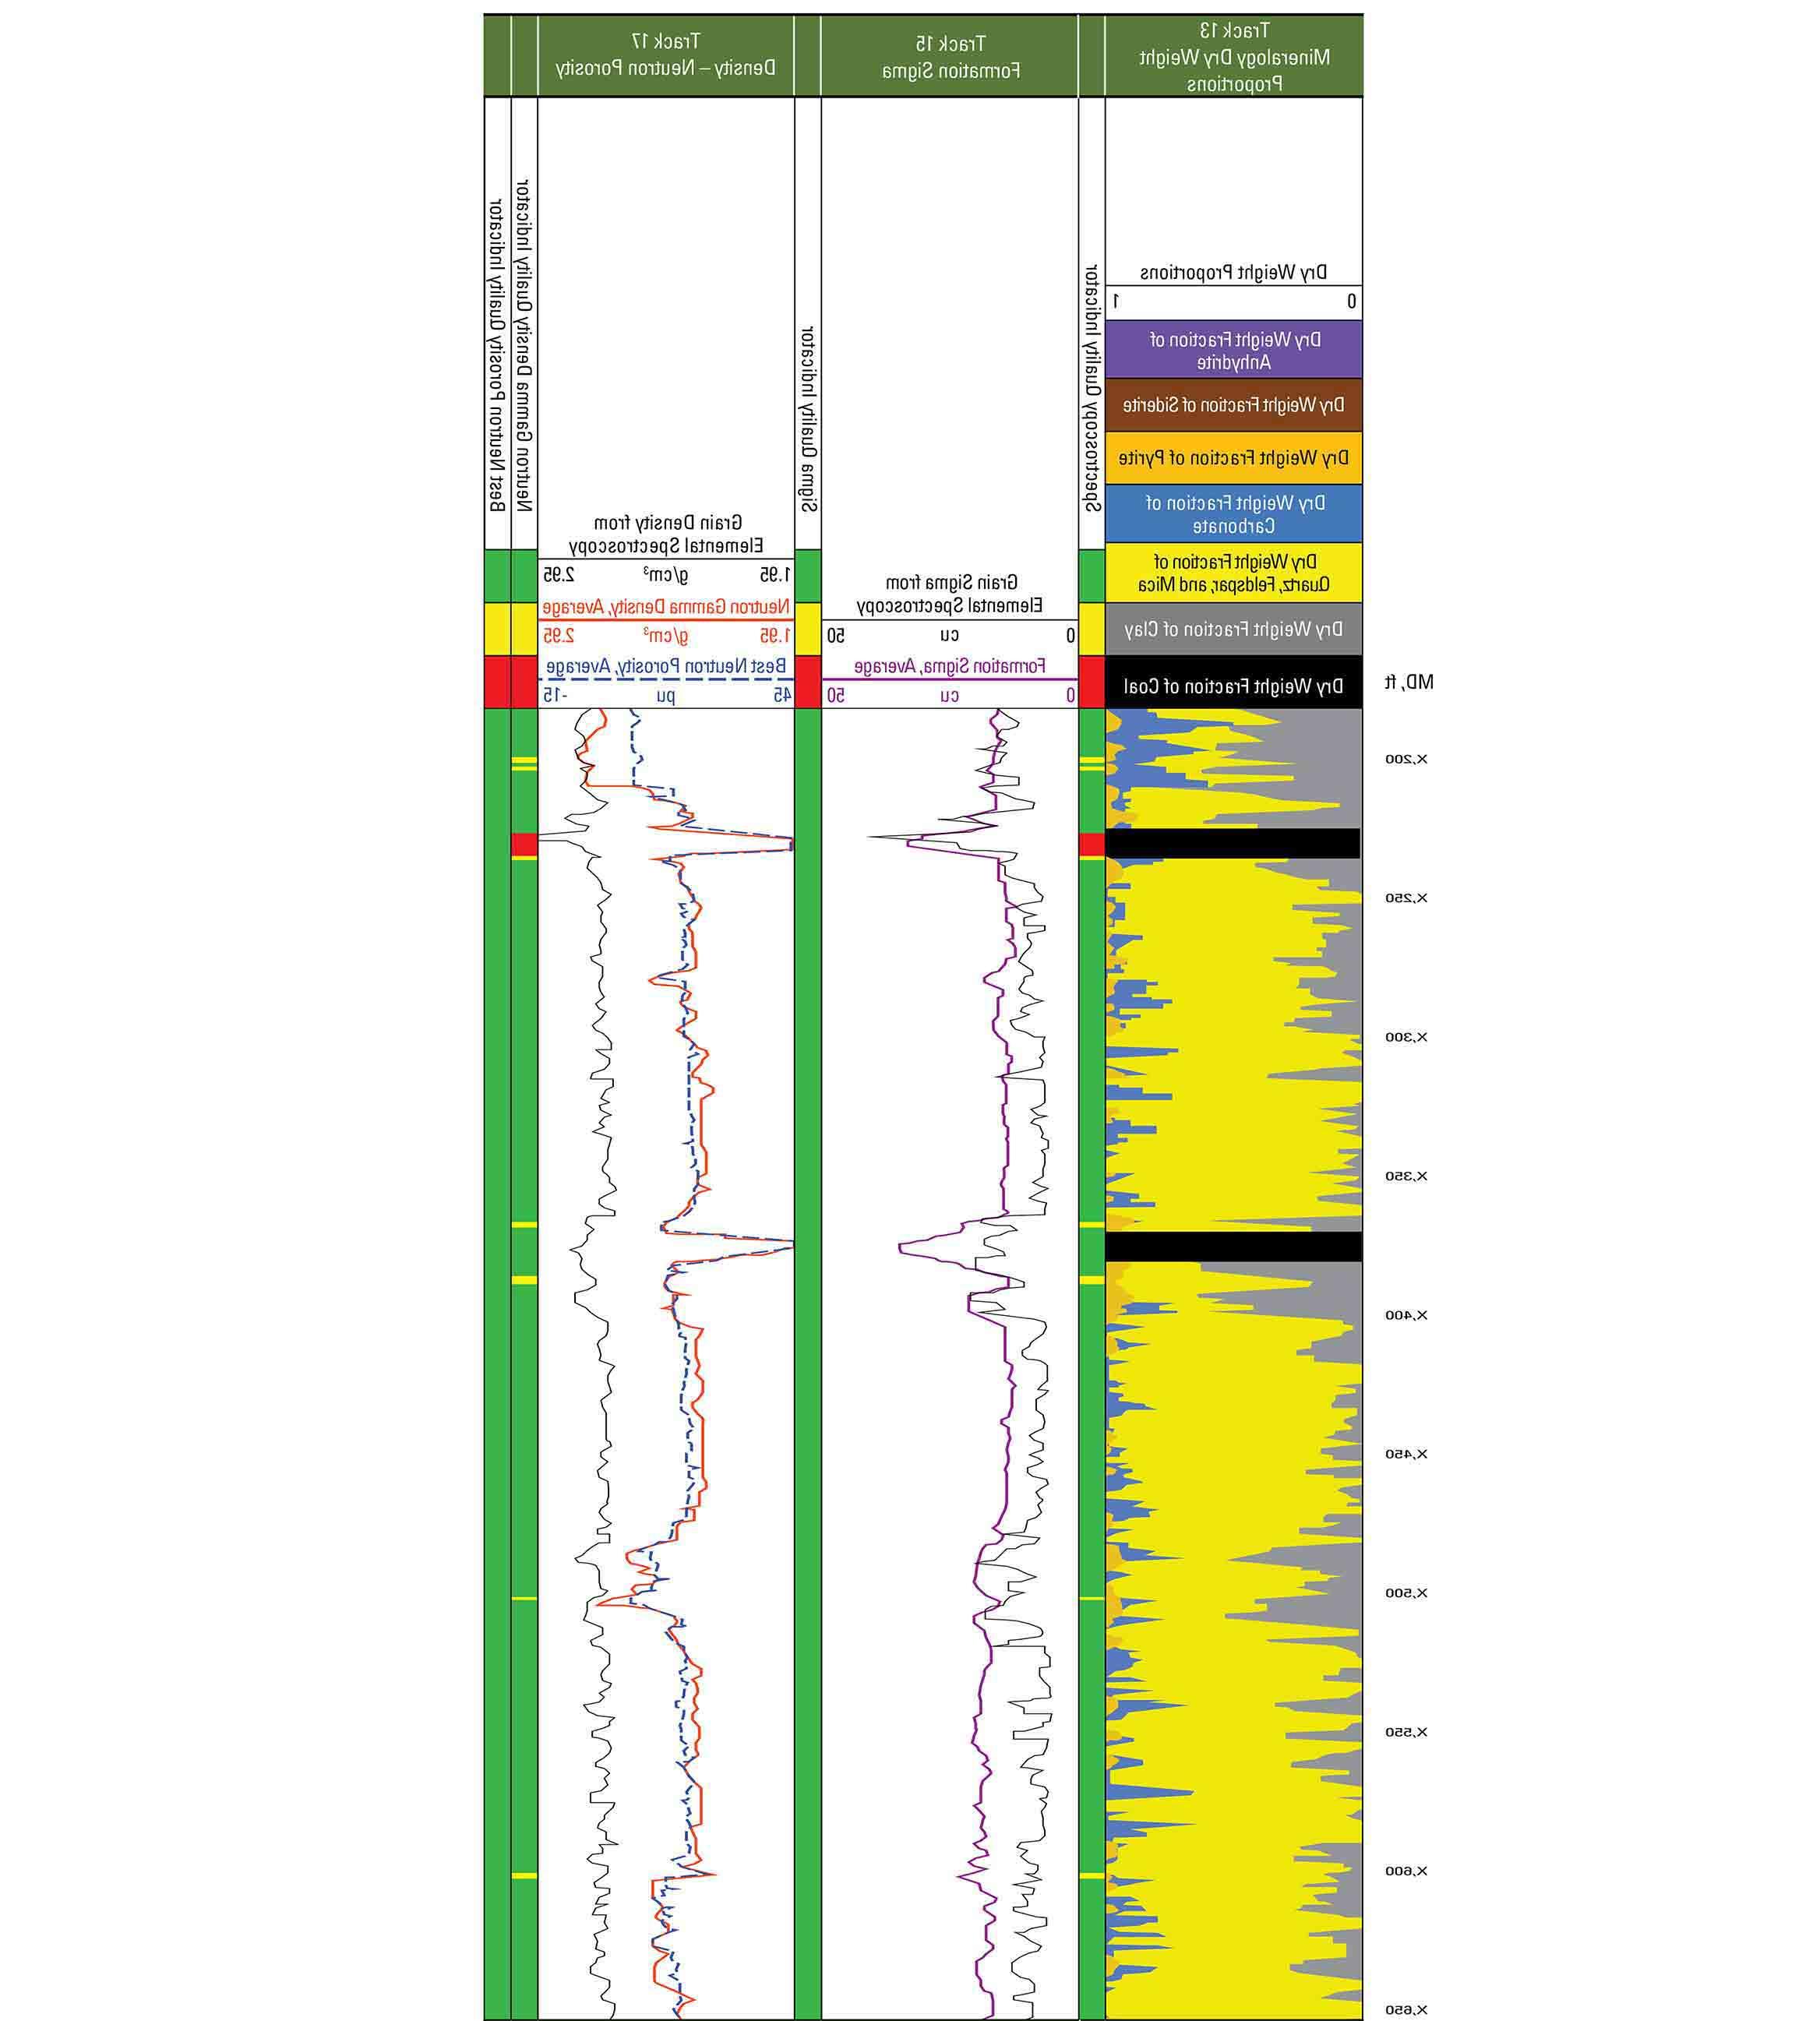 A log from the NeoScope service showing various mineralogy, formation sigma, and density-neutron porosity tracks